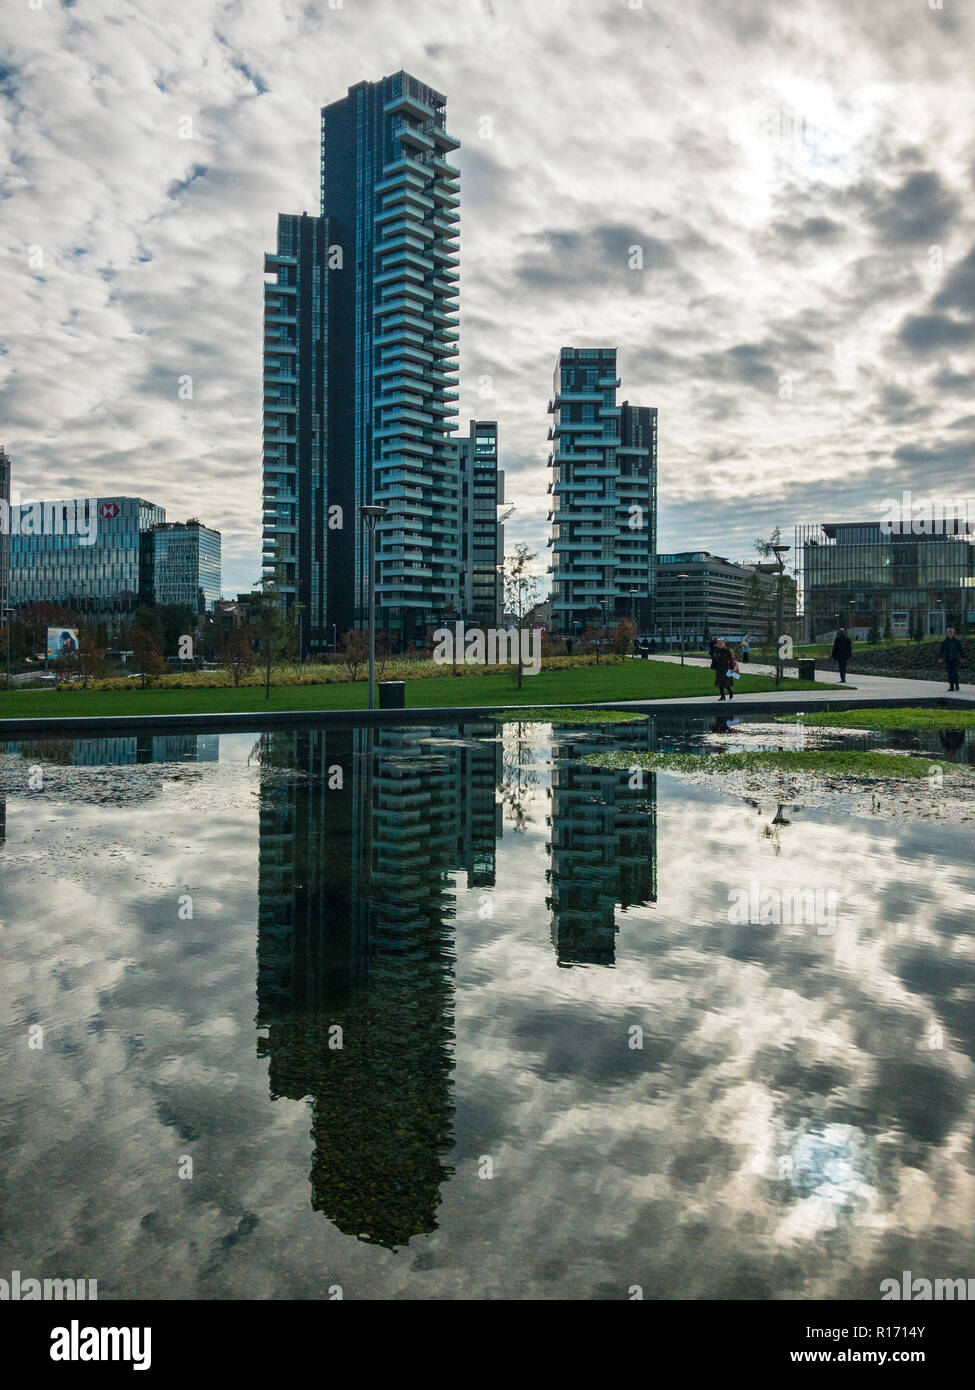 Library of trees, new Milan park. Solaria tower. Paths of the park with a panoramic view of the skyscrapers, Italy. Tower mirrored in the fountain Stock Photo